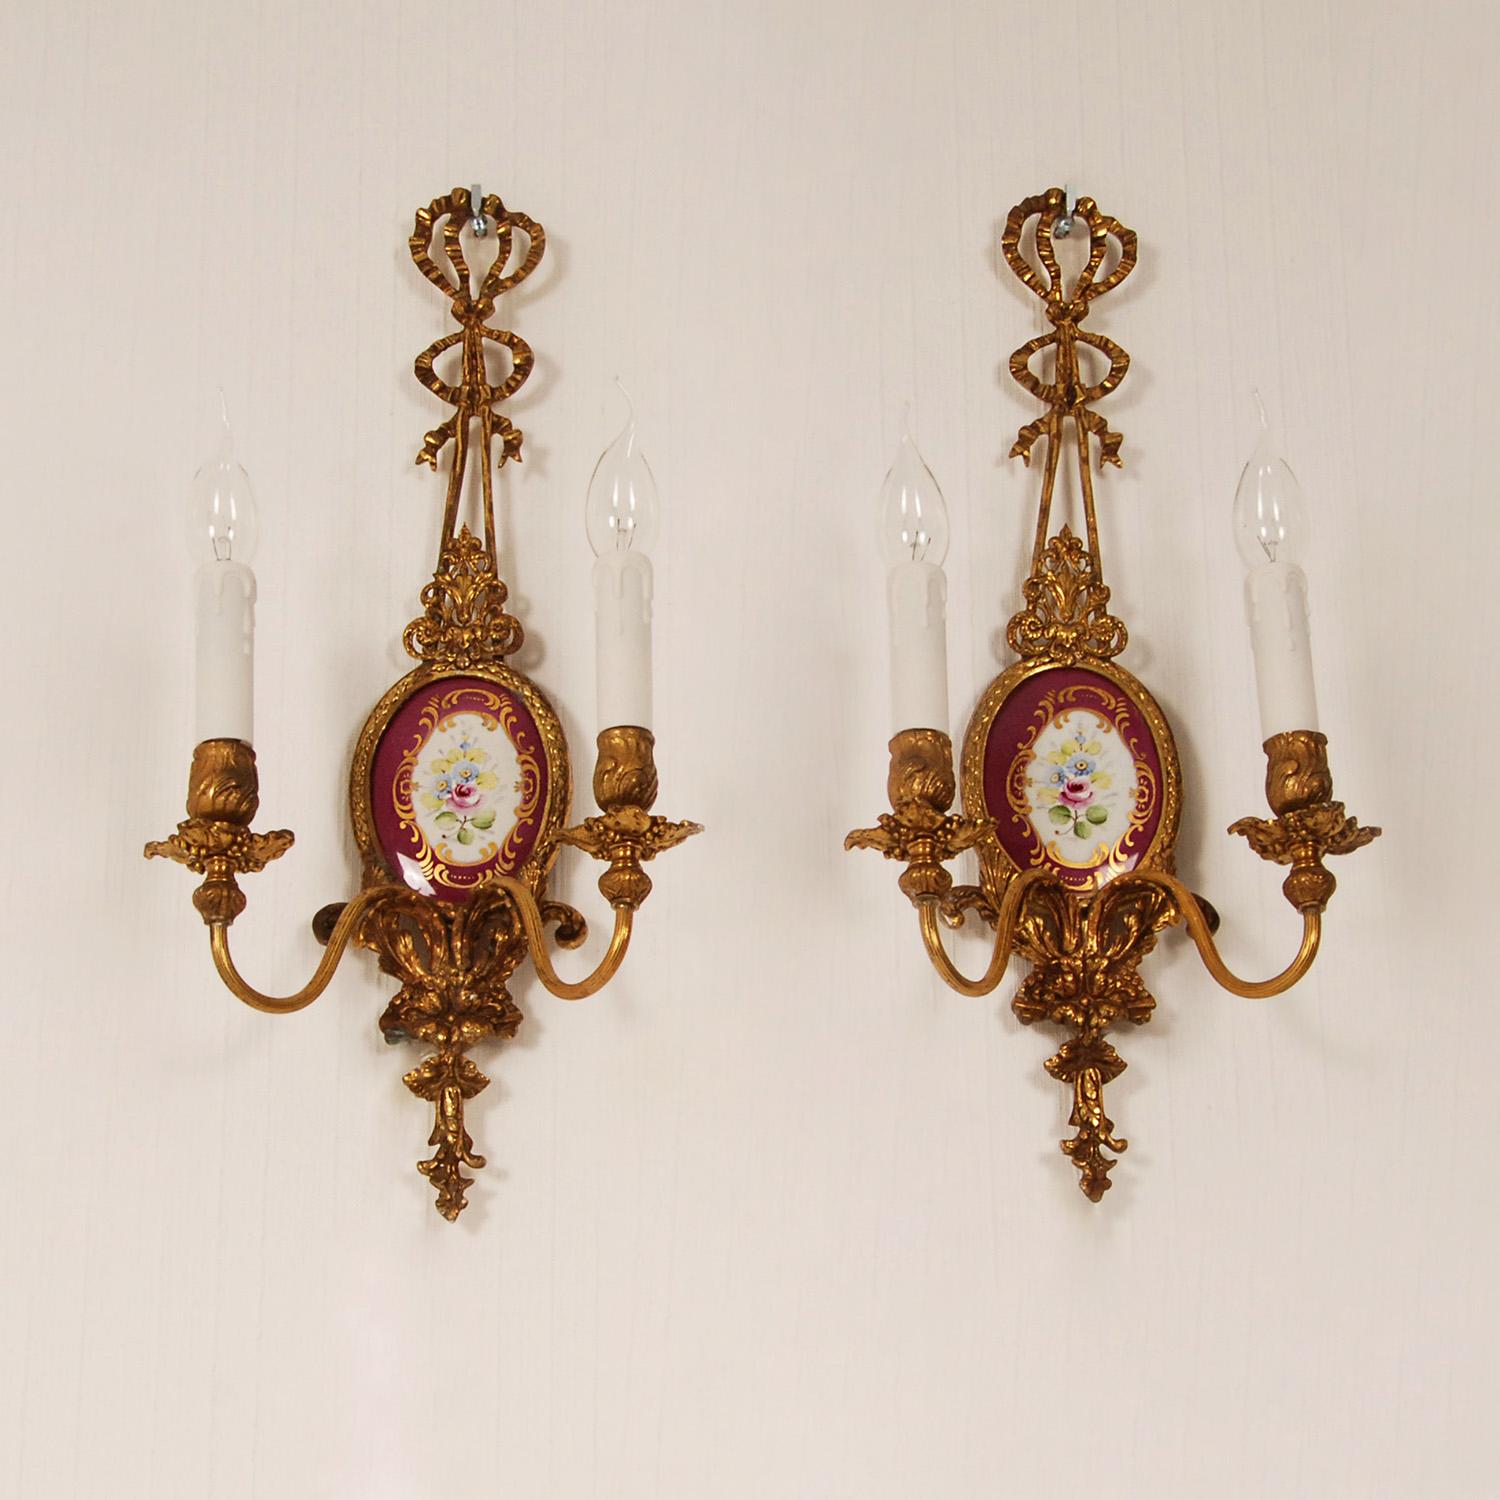 Mid-20th Century Vintage Wall Lamps Gold Gilt Bronze Ribbons Porcelain Neoclassical sconces pair  For Sale